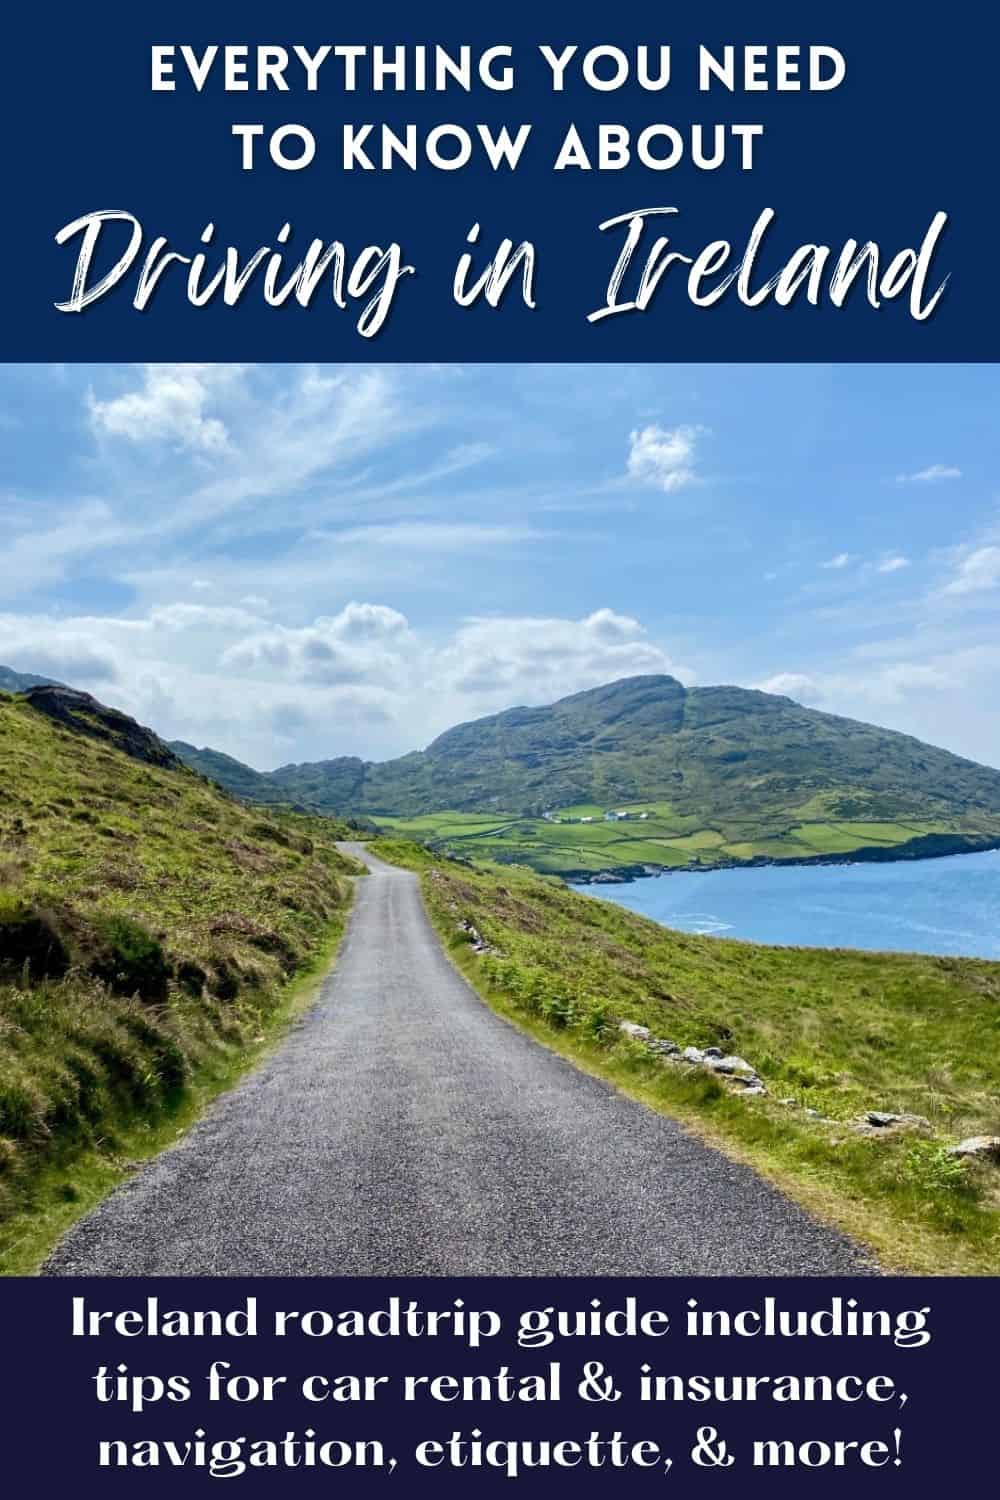 Detailed Guide to Driving in Ireland | A ton of helpful Ireland roadtrip tips, including "Should I rent a car in Ireland?", tips for driving in Ireland, renting a car in Ireland (plus insurance), navigation, road rules, & driving etiquette for narrow roads. #ireland #roadtrip #visitireland